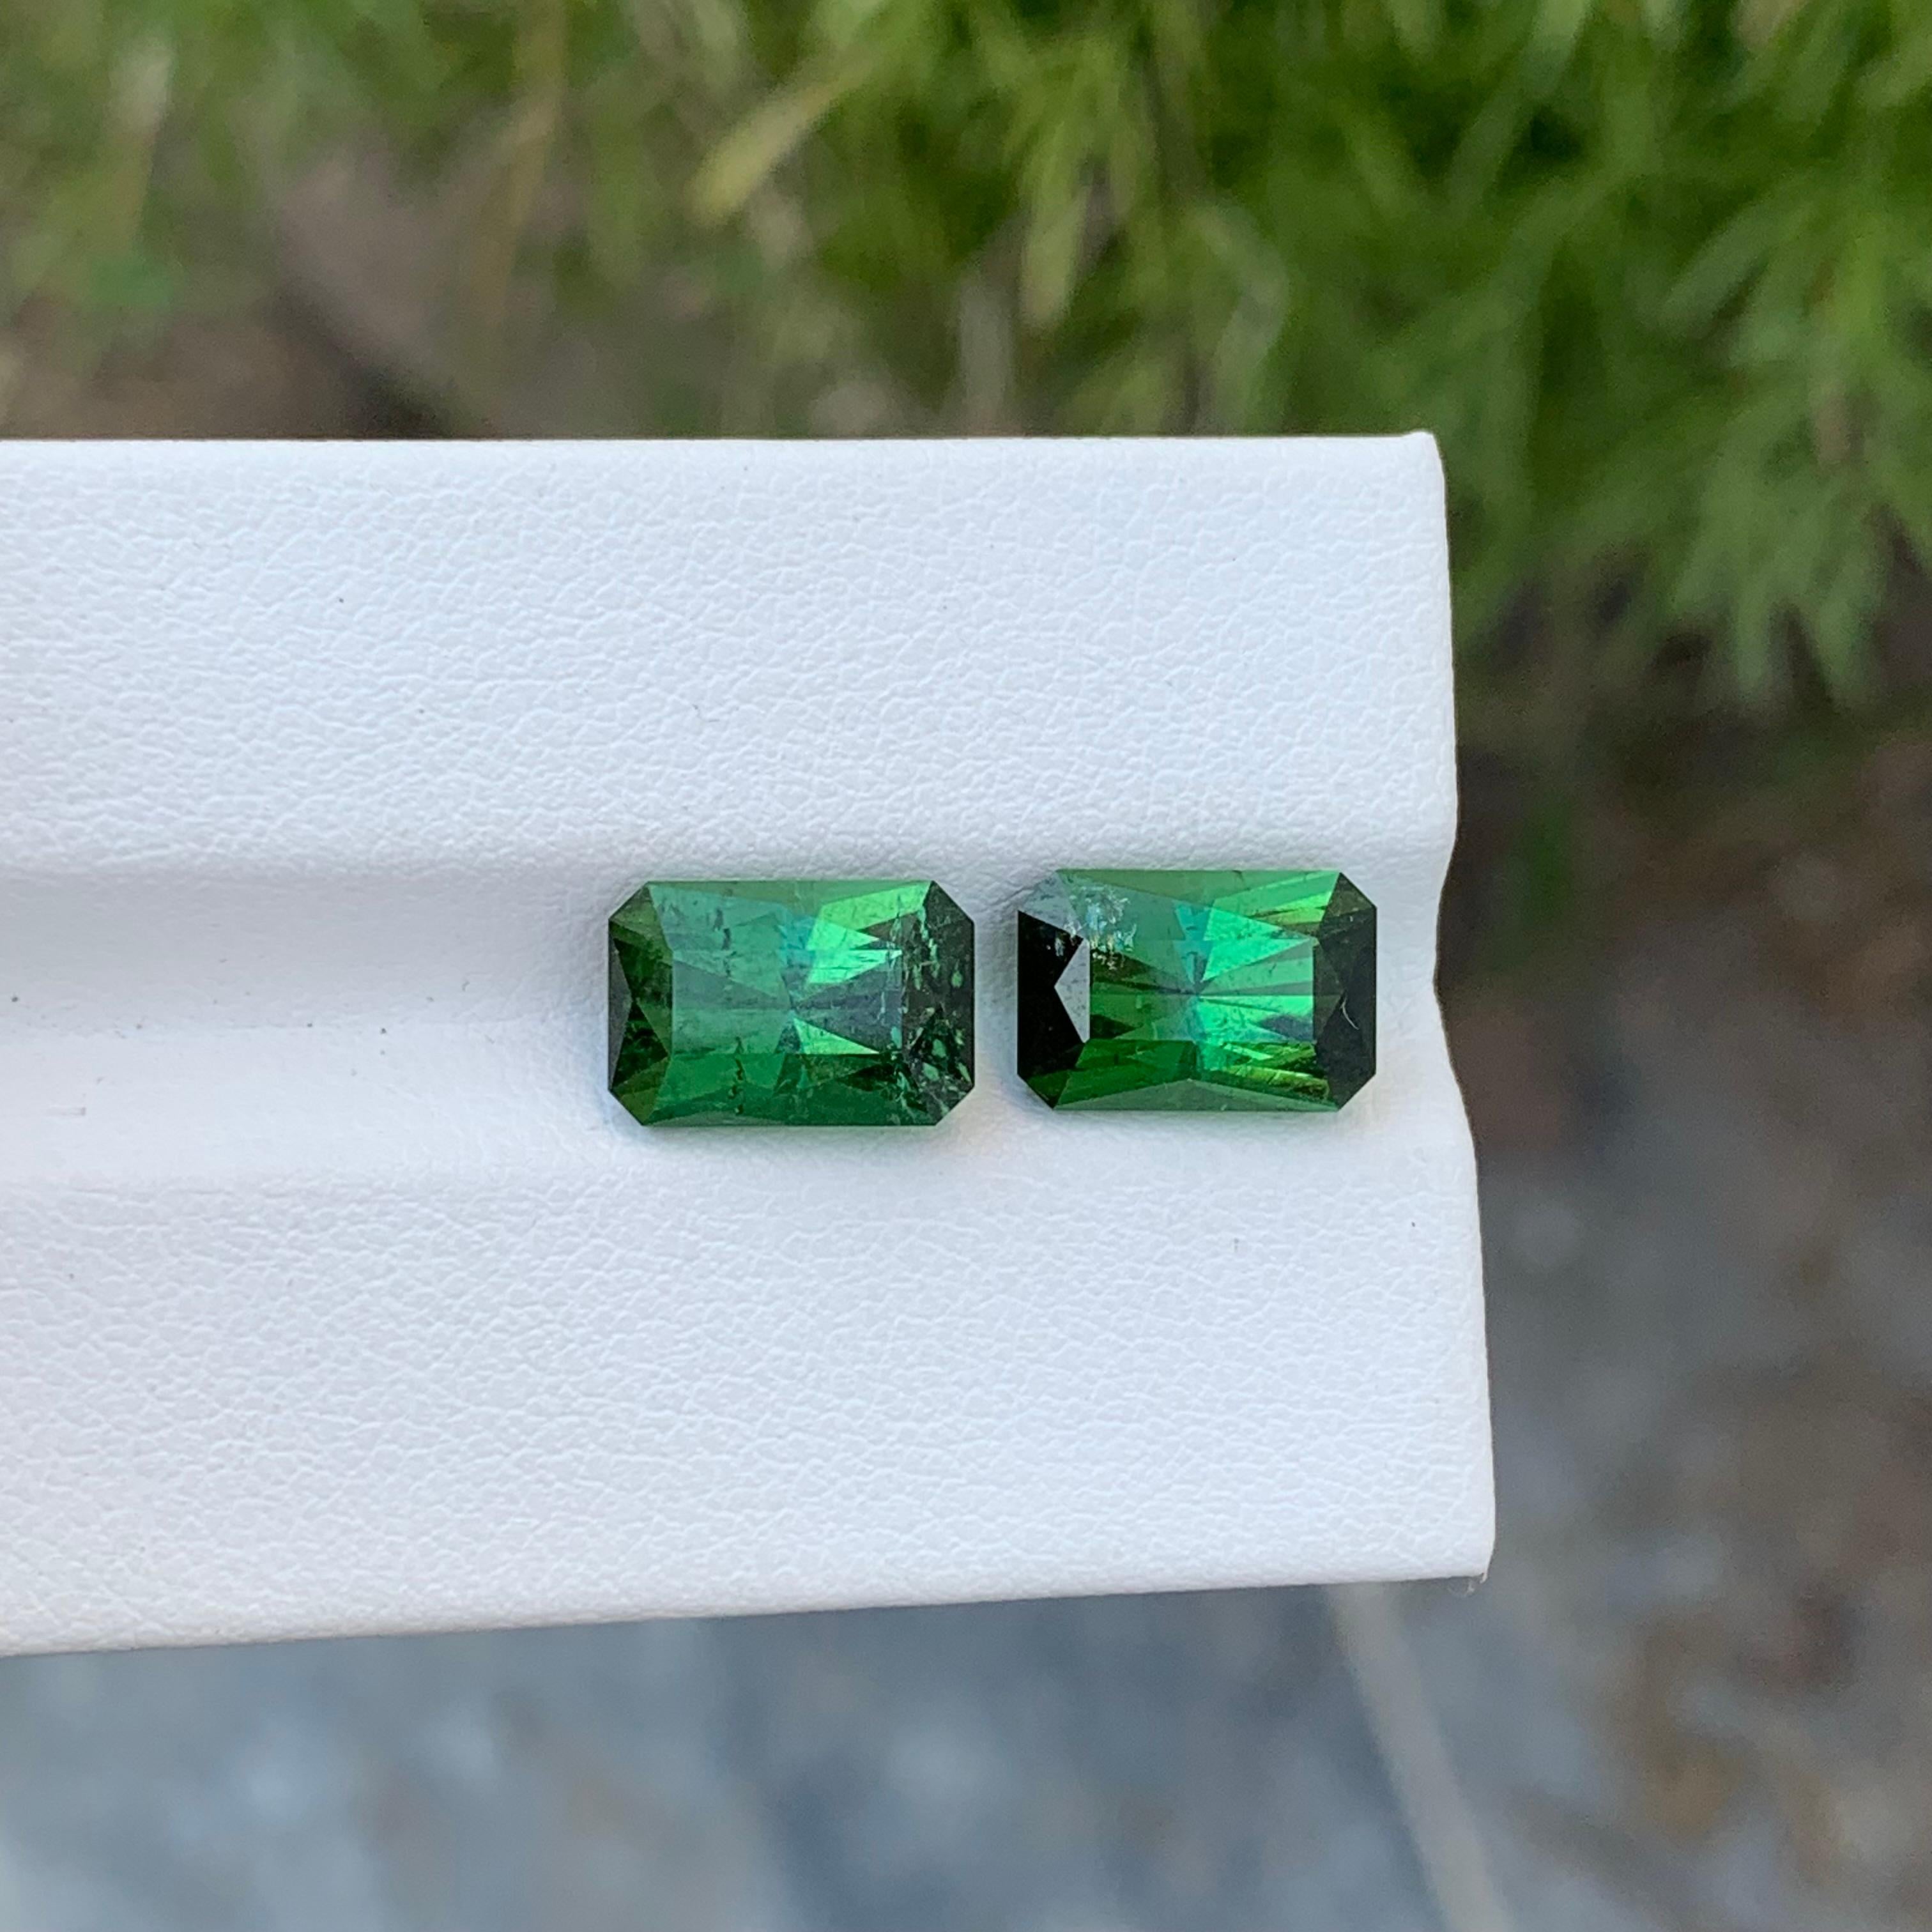 Loose Green Tourmaline Pair 

Weight: 8.0 Carats
Dimension: 10.5 x 7.1 x 6.5 Mm
Colour: Green 
Origin: Afghanistan
Certificate: On Demand
Treatment: Non

Tourmaline is a captivating gemstone known for its remarkable variety of colors, making it a